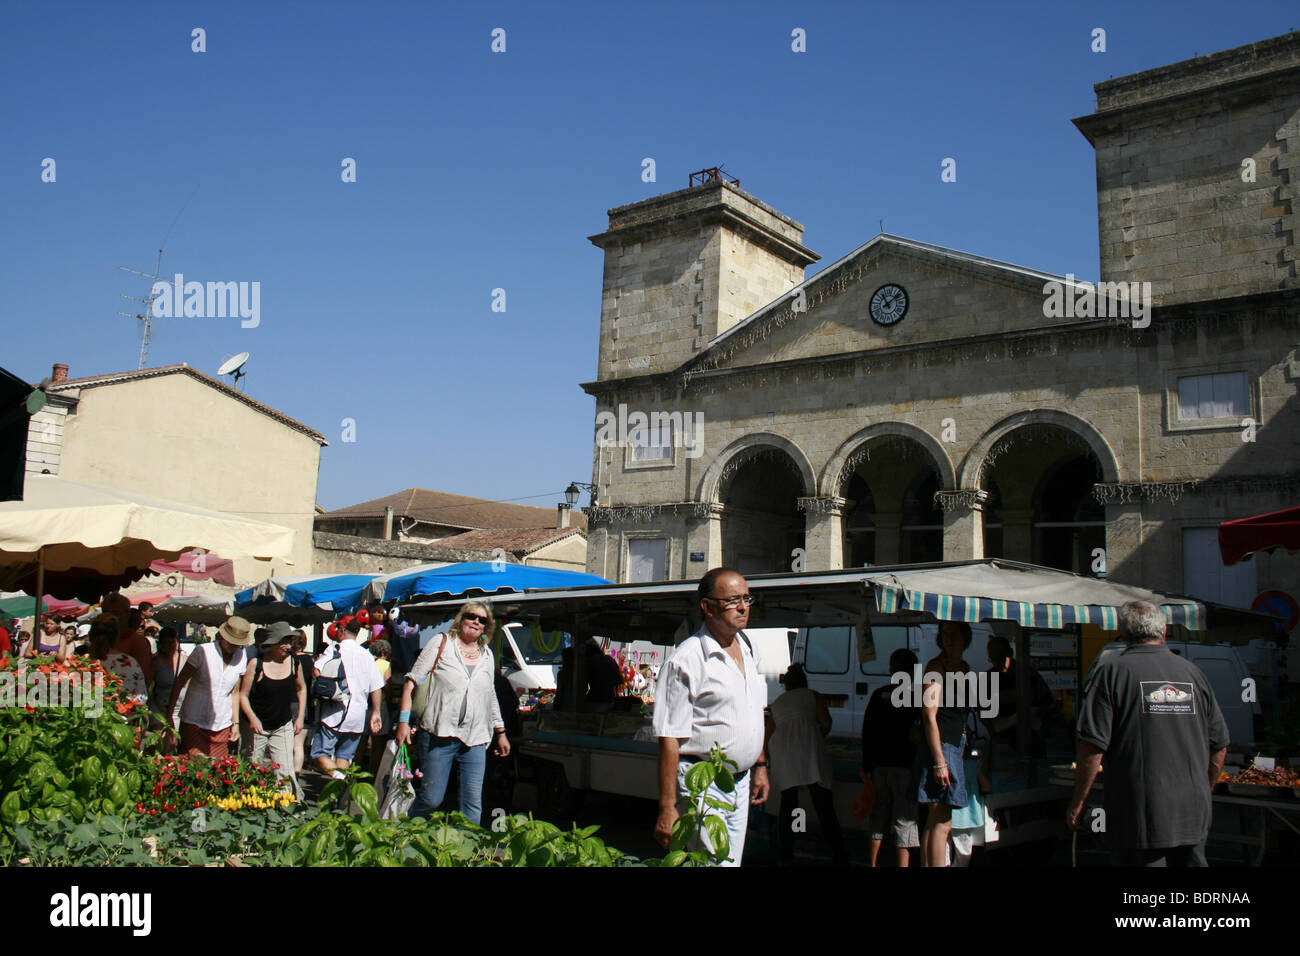 Friday, the weekly market day in Lectoure, France Stock Photo